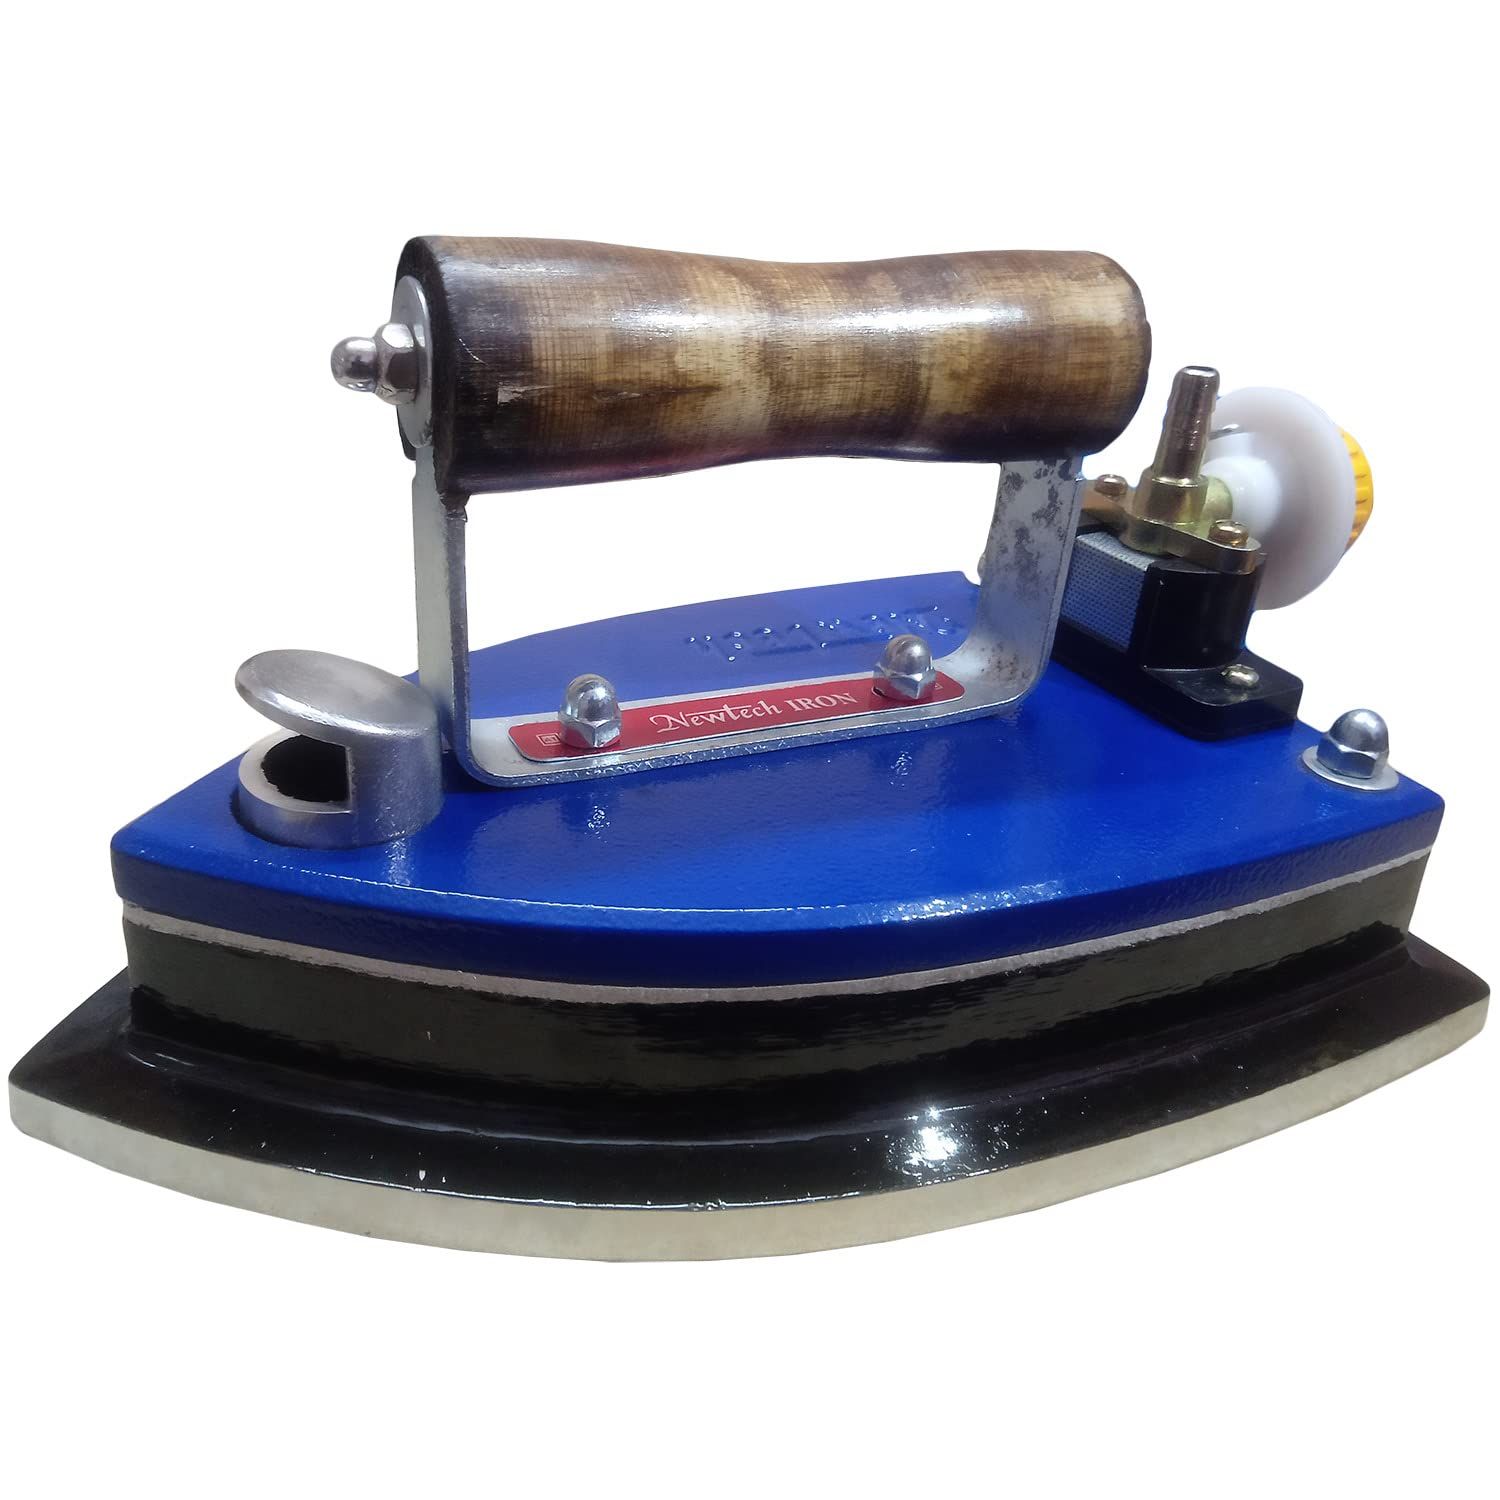 Newtech LPG Gas Iron press [ 5.5 kg India's No.1 Brand Newtech] Best for Dhobi/Laundary [Heavy duty + Longlife] with Wooden Handle (lakdi ka handle) - New Version 2022 Model